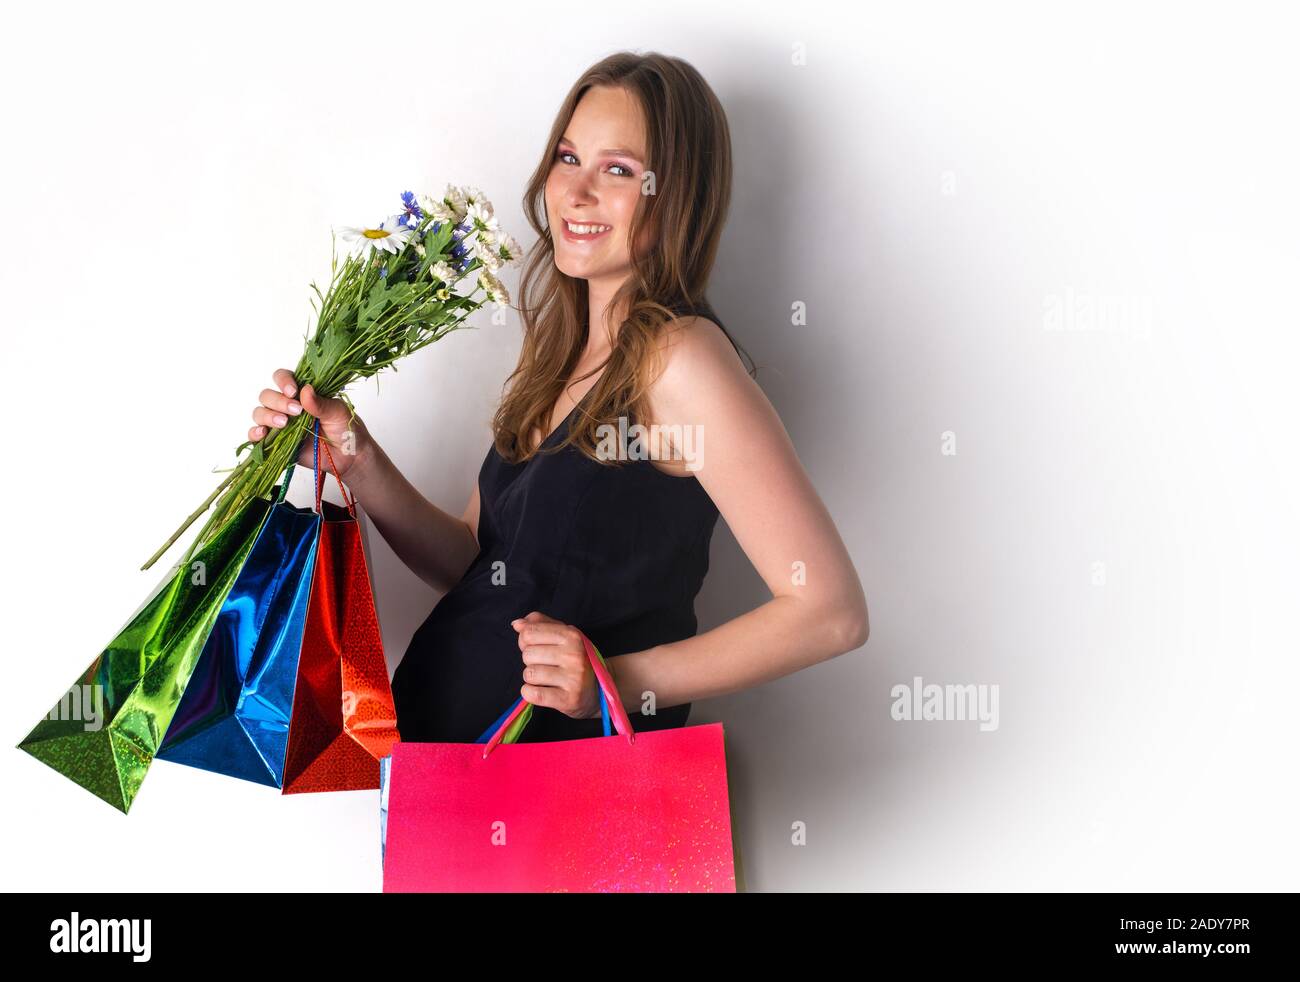 a pregnant girl stands against the wall with flowers and bags from the store. Joyful pregnant woman with shopping bags holding flower bouquet Stock Photo